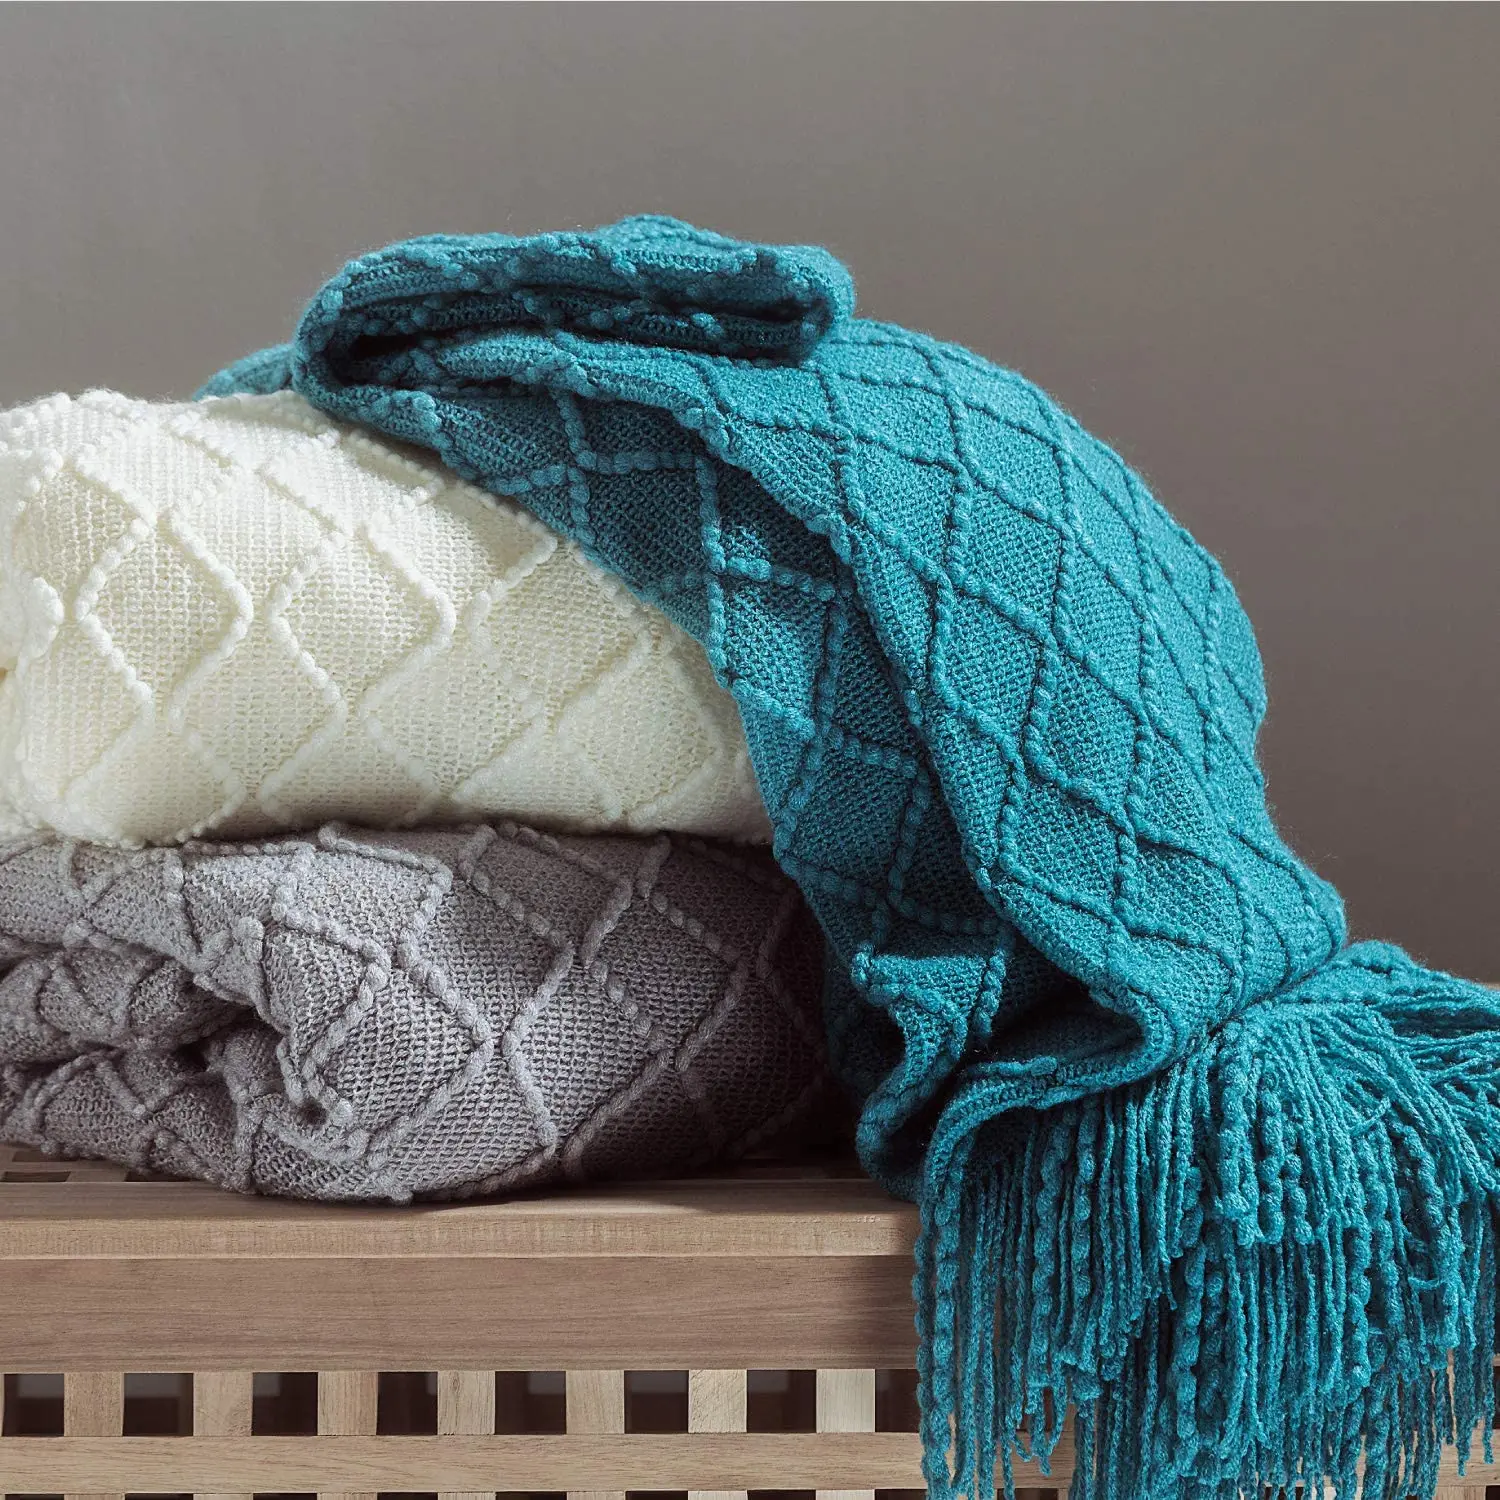 Hot Sale Knitted Blanket Lightweight Decorative Throw With Tassels For Couch Bed Sofa Travel